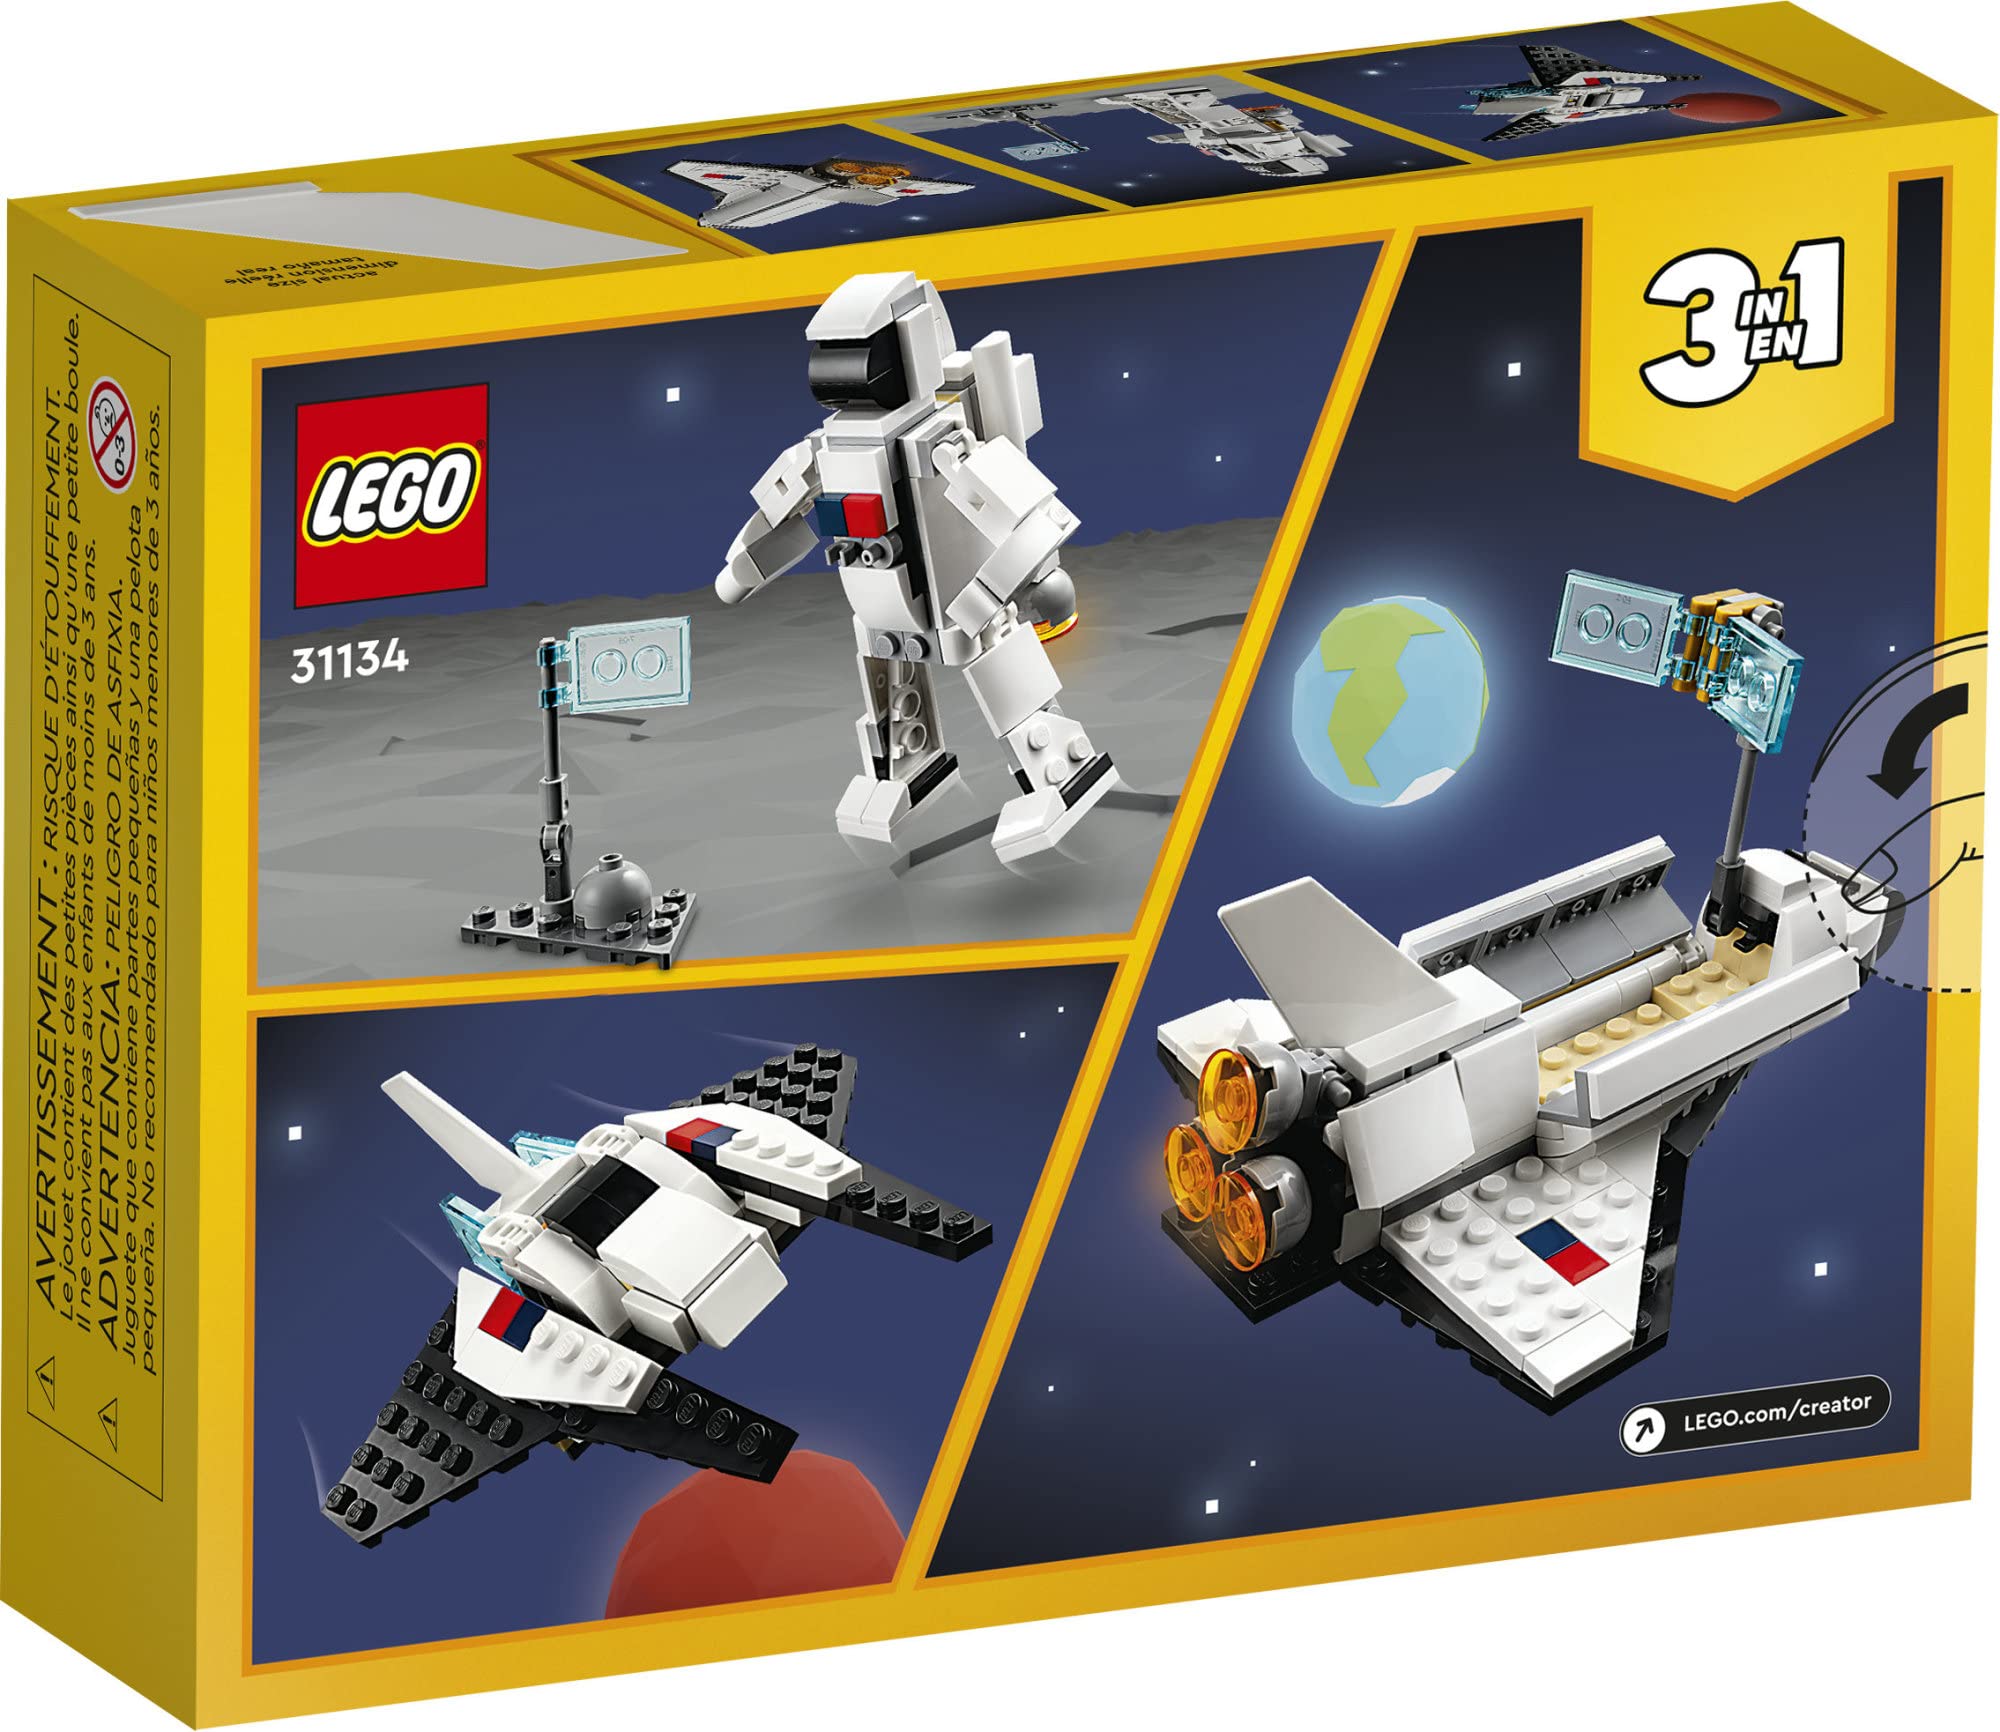 LEGO Creator 3 in 1 Space Shuttle Toy to Astronaut Figure to Spaceship 31134, Building Toys for Kids, Boys, Girls Ages 6 and up, Creative Gift Idea